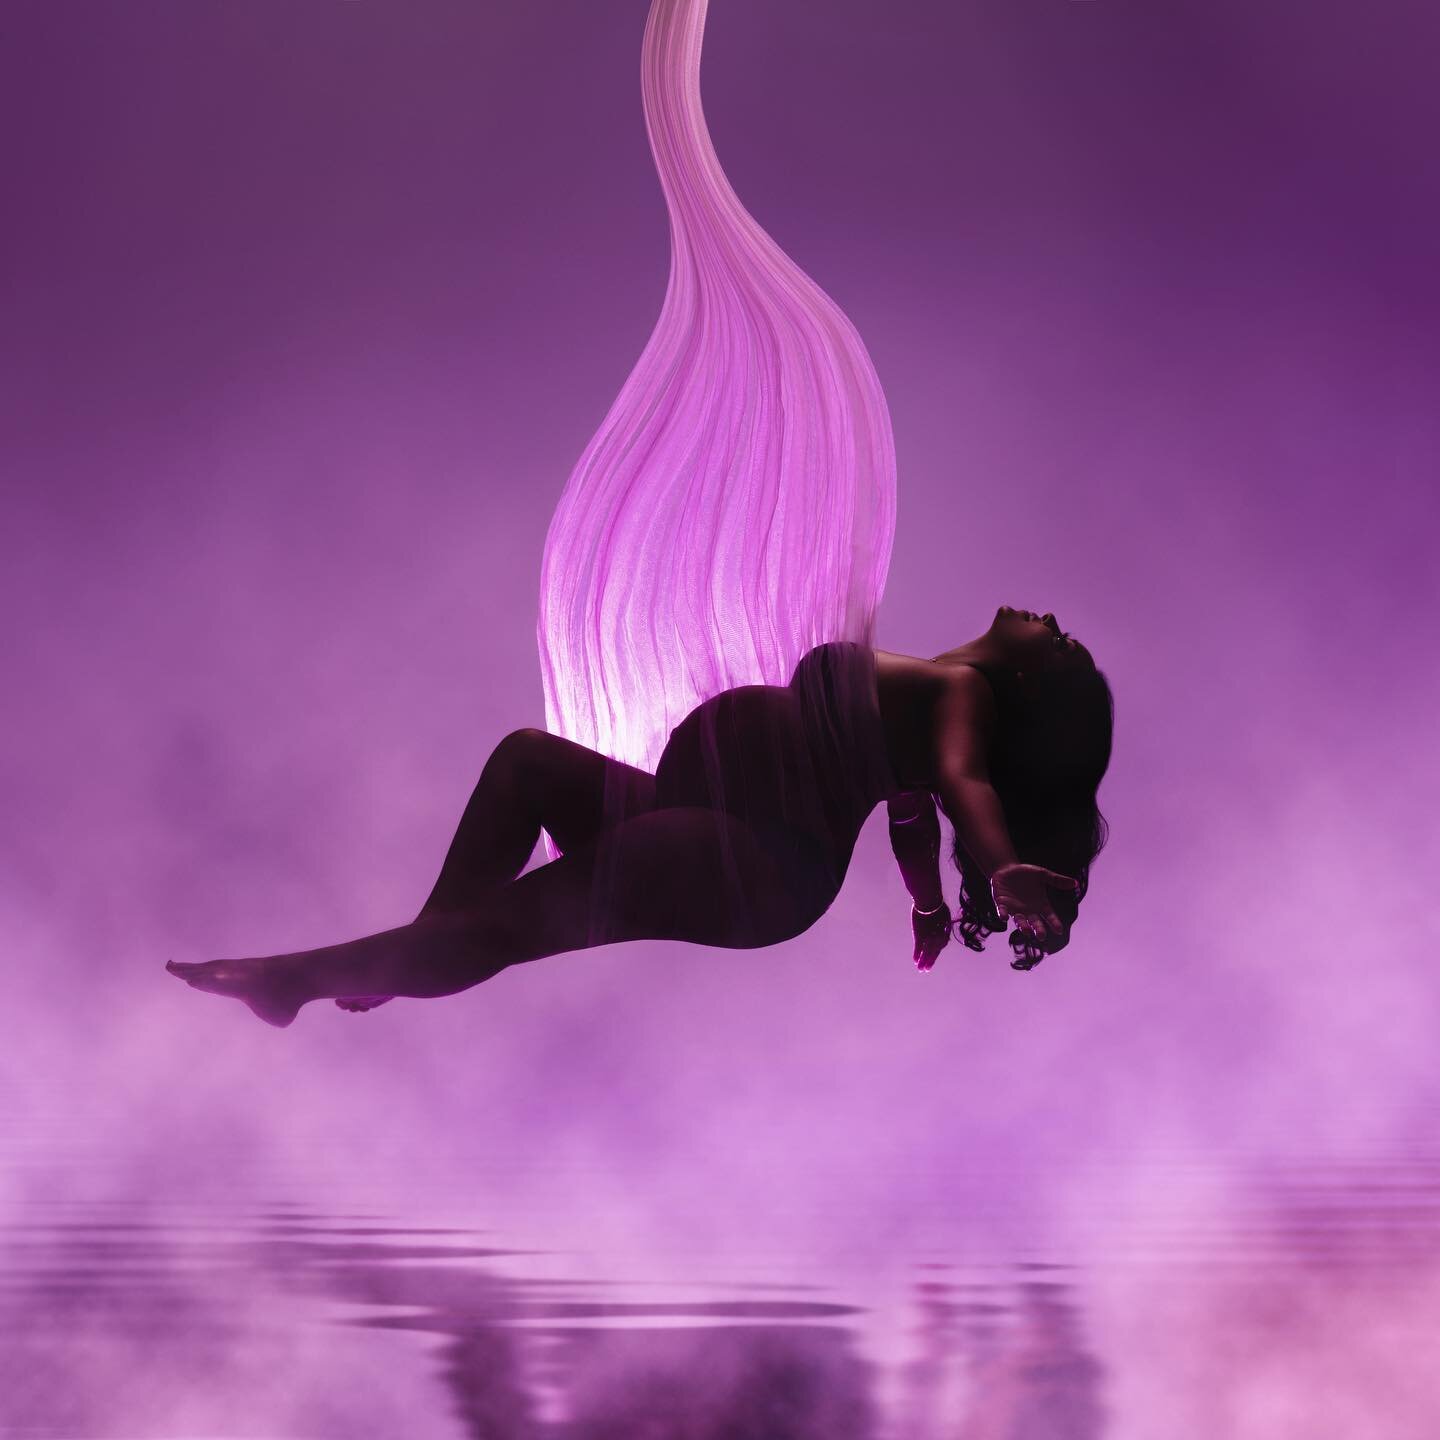 Magical Mommy. Powerful, ethereal beauty scene like a genie in a bottle. Inspired by Aladdin :)